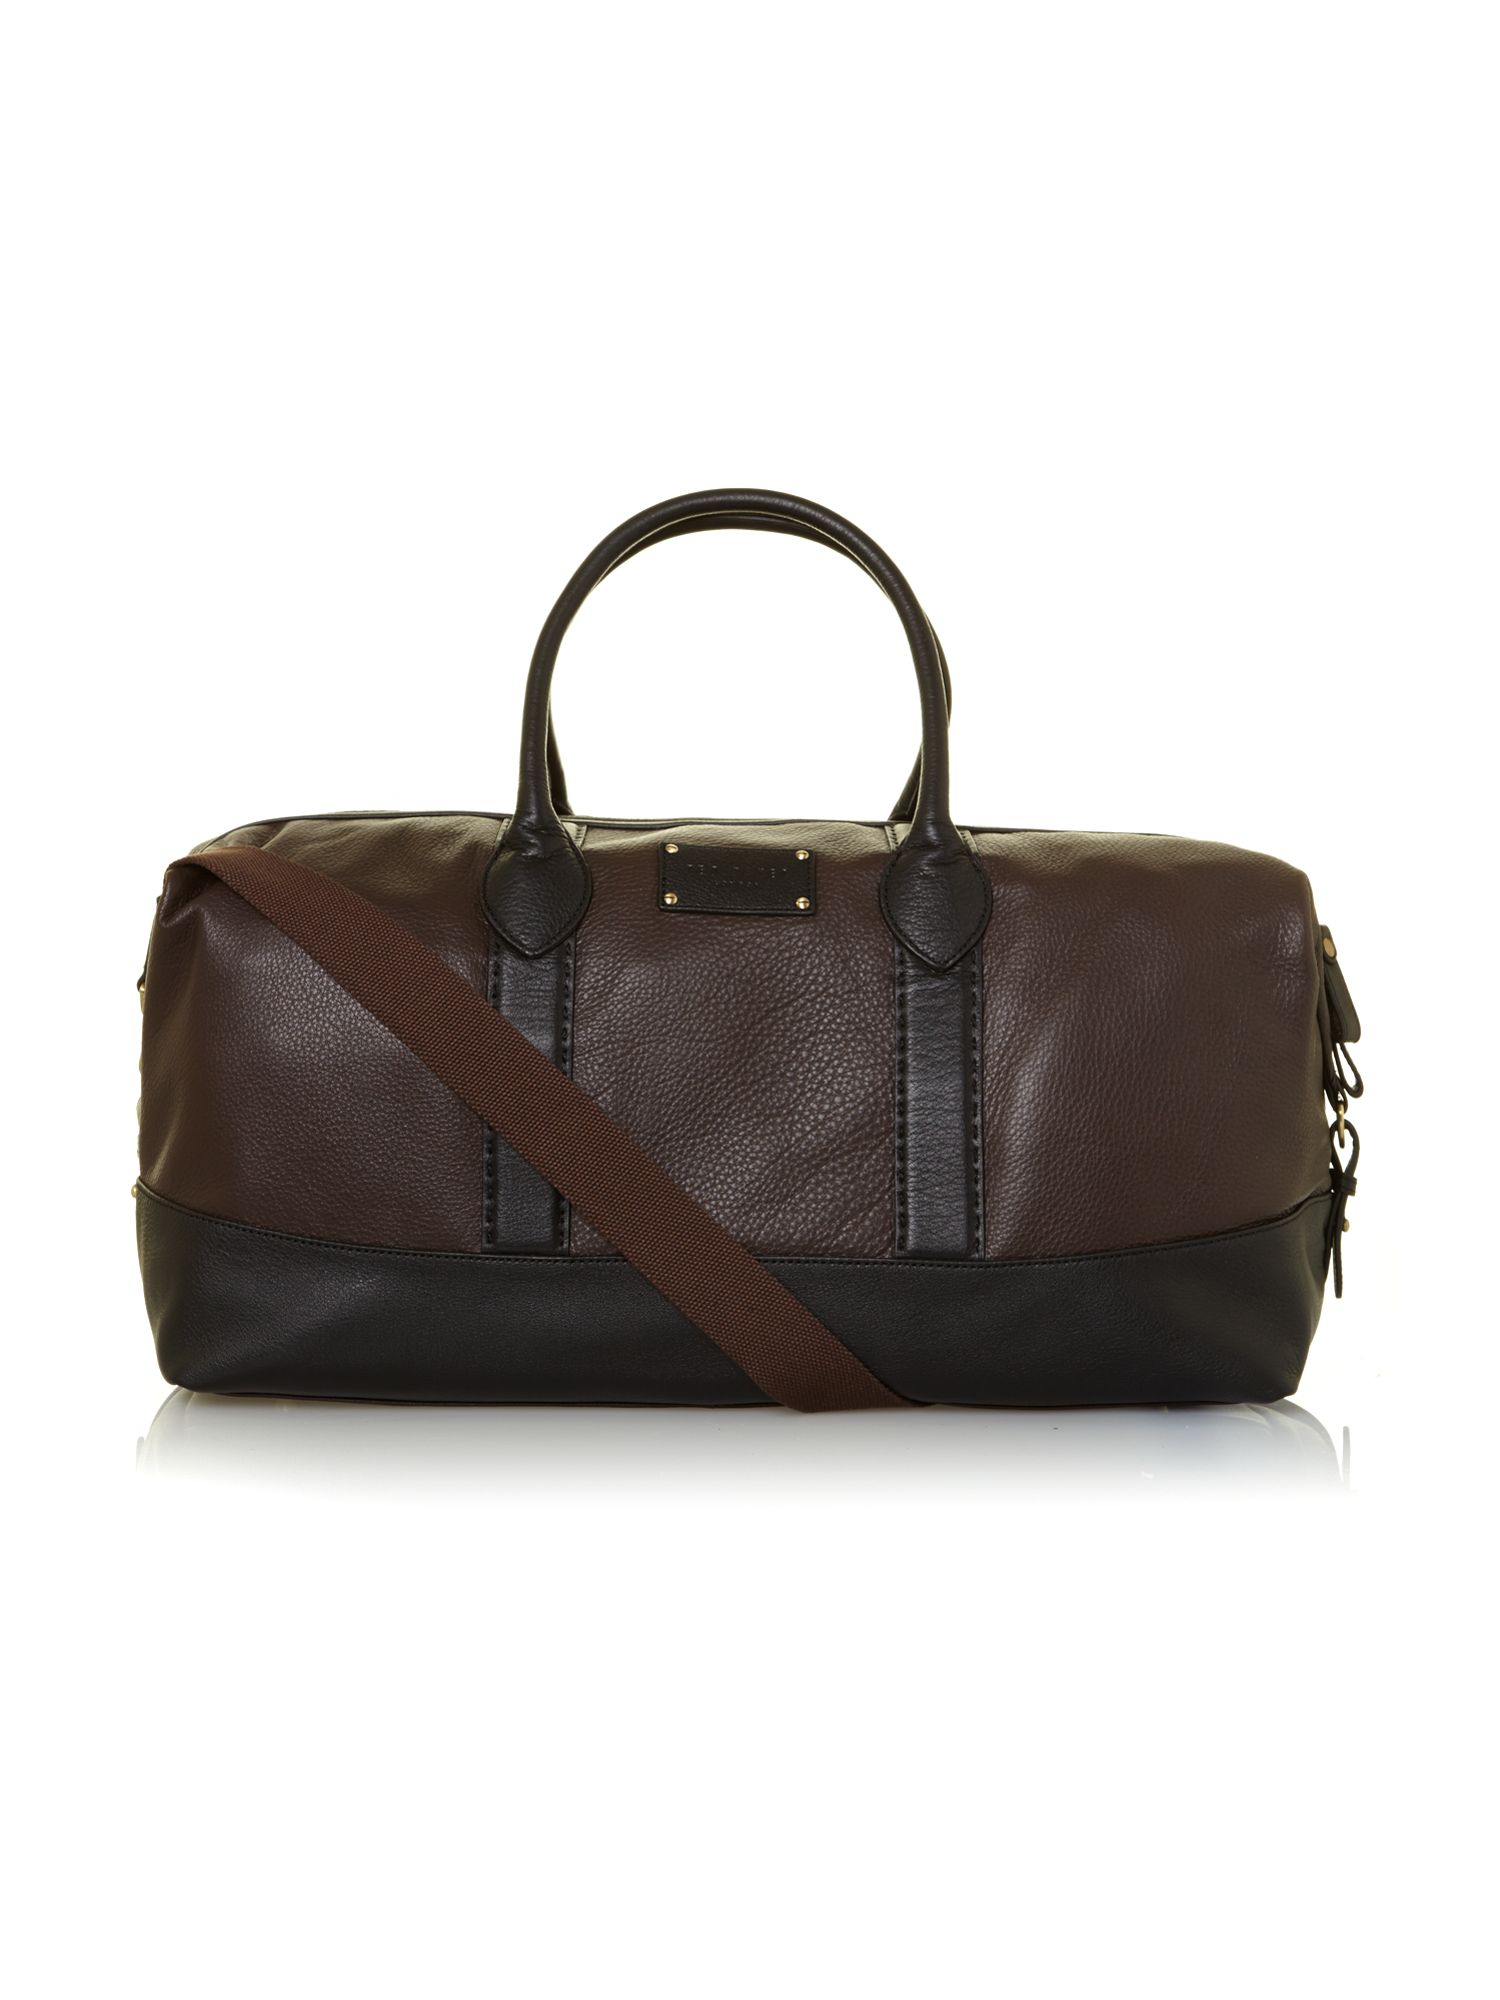 Ted baker Stab Stitch Strap Holdall Bag in Brown for Men (Chocolate) | Lyst